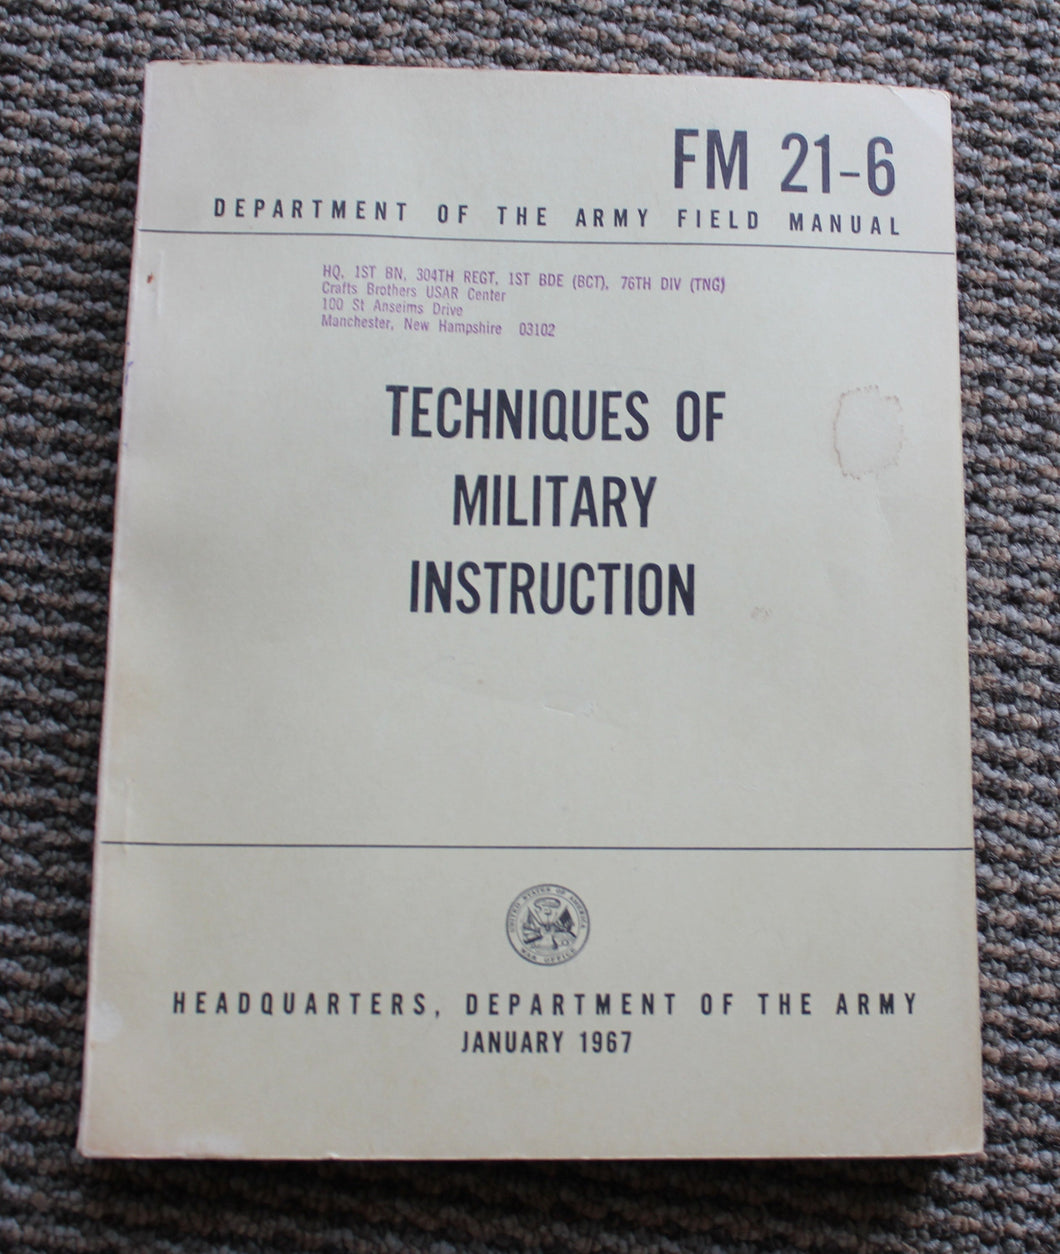 Vietnam War ISSUE 1967 US Army Headquarters Techniques of Military Instruction FM 21-6